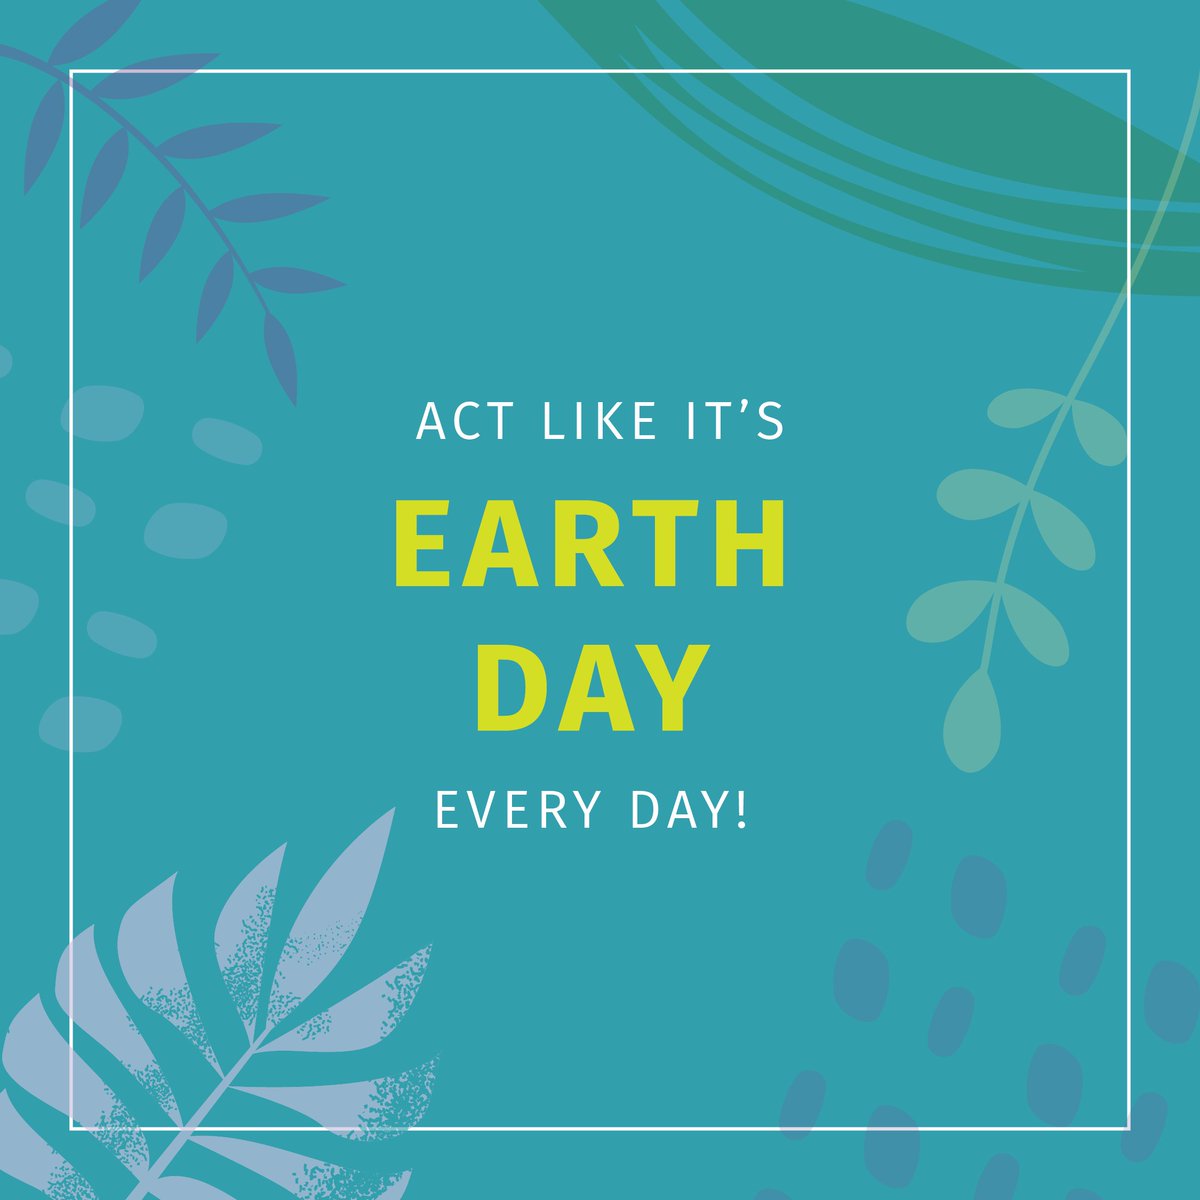 While Earth Day comes once a year, we believe it should be kept in mind daily. 
Let us know how you’re celebrating.🌎
#EarthDayEveryday #CelebrateSustainably #ProtectOurPlanet